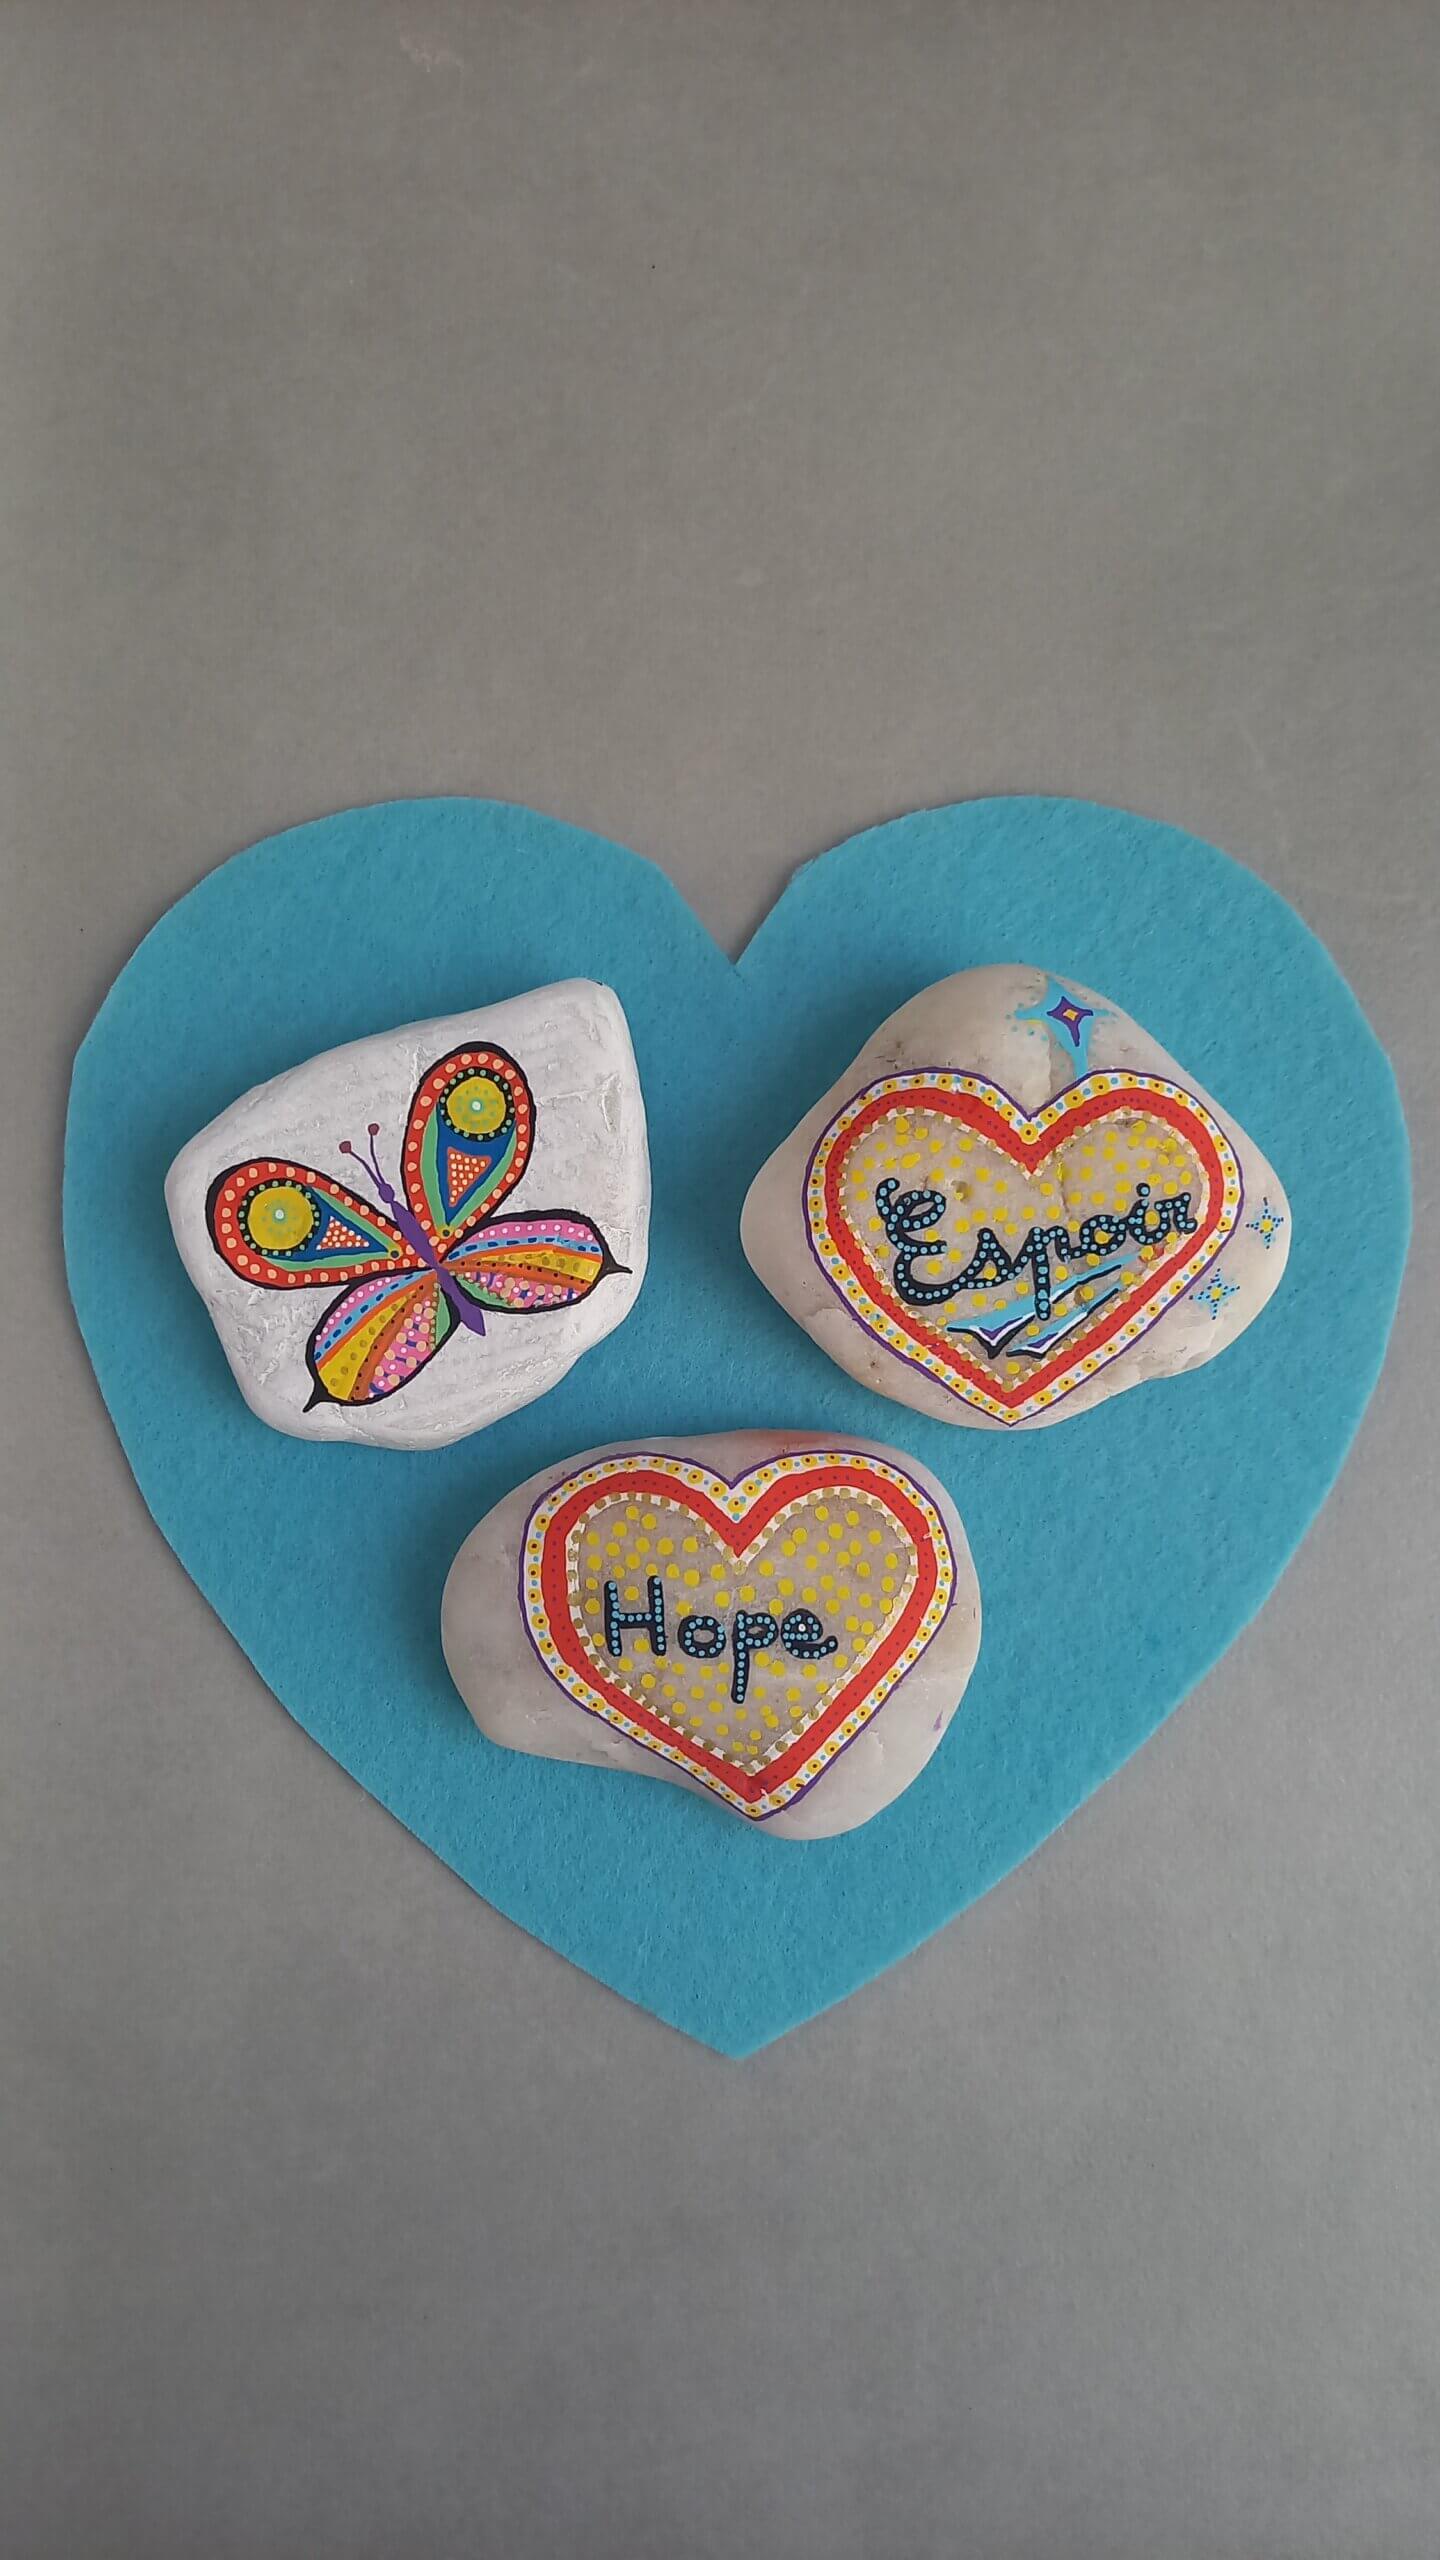 Rocks with a drawing of a butterfly, and hearts on them